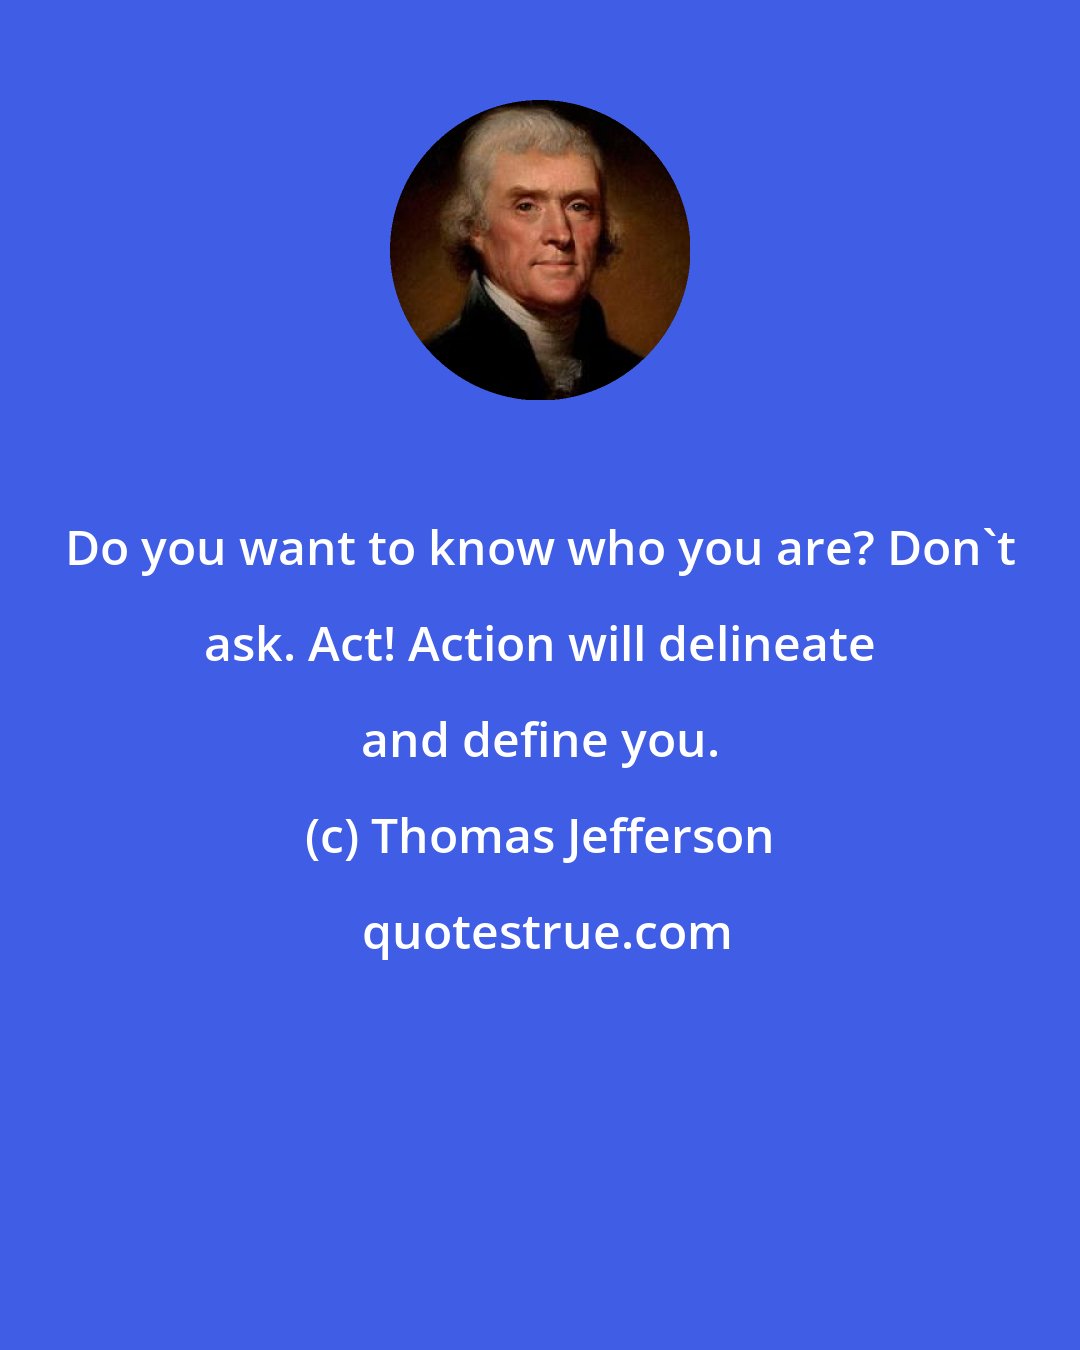 Thomas Jefferson: Do you want to know who you are? Don't ask. Act! Action will delineate and define you.